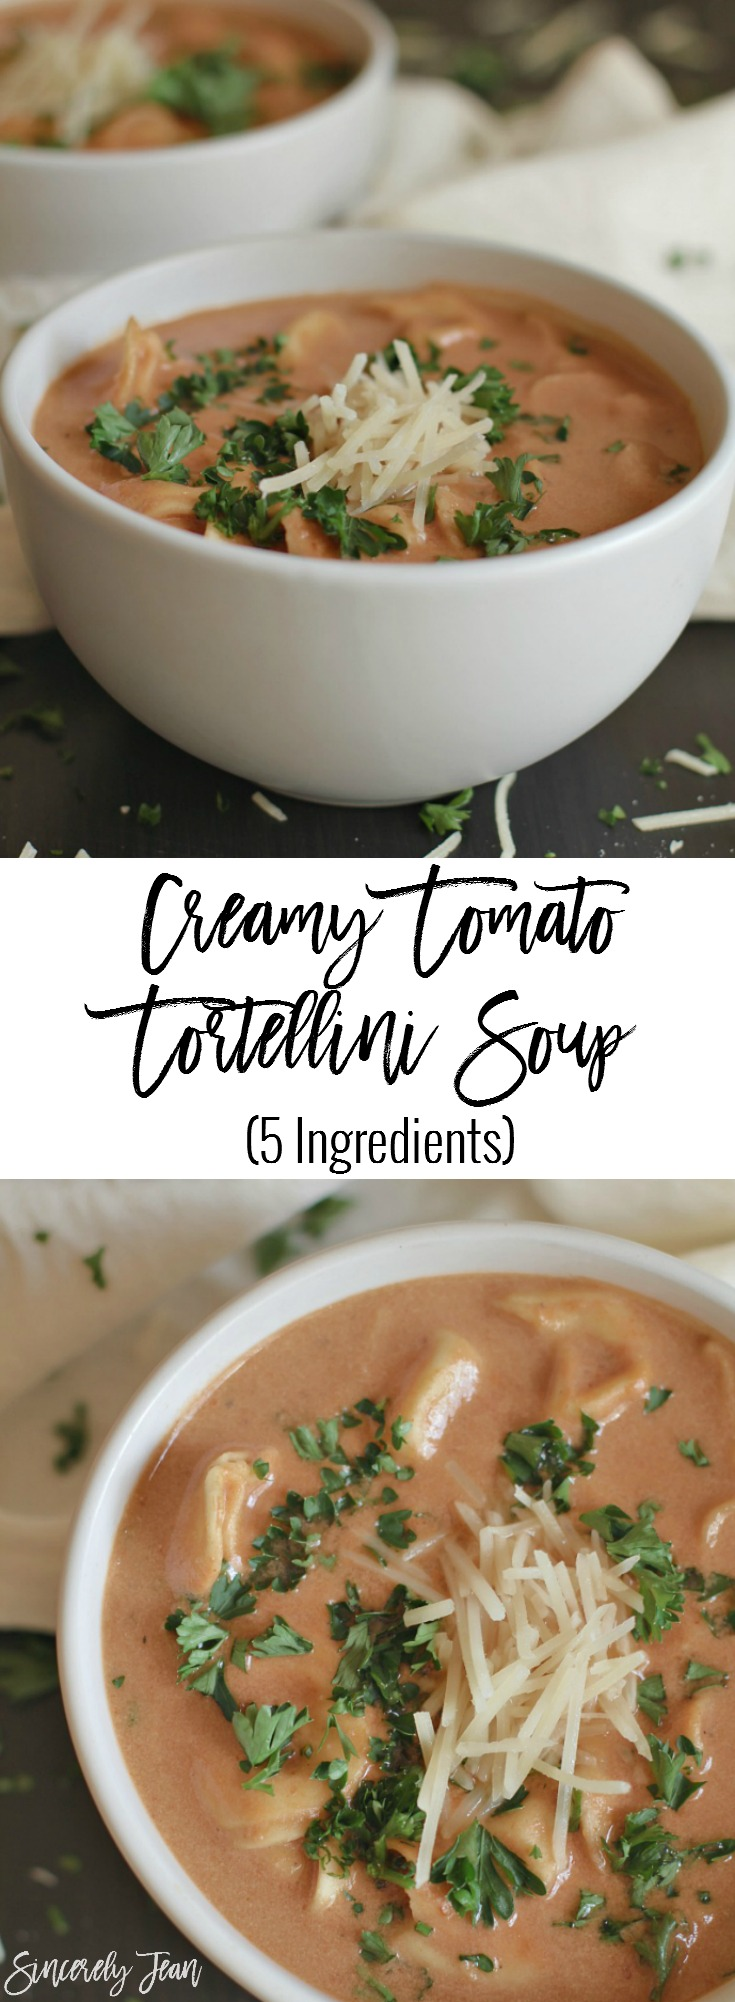 5 Ingredient Creamy Tomato Tortellini Soup - The perfect fall soup for family dinner that is so simple to make! | www.SincerelyJean.com